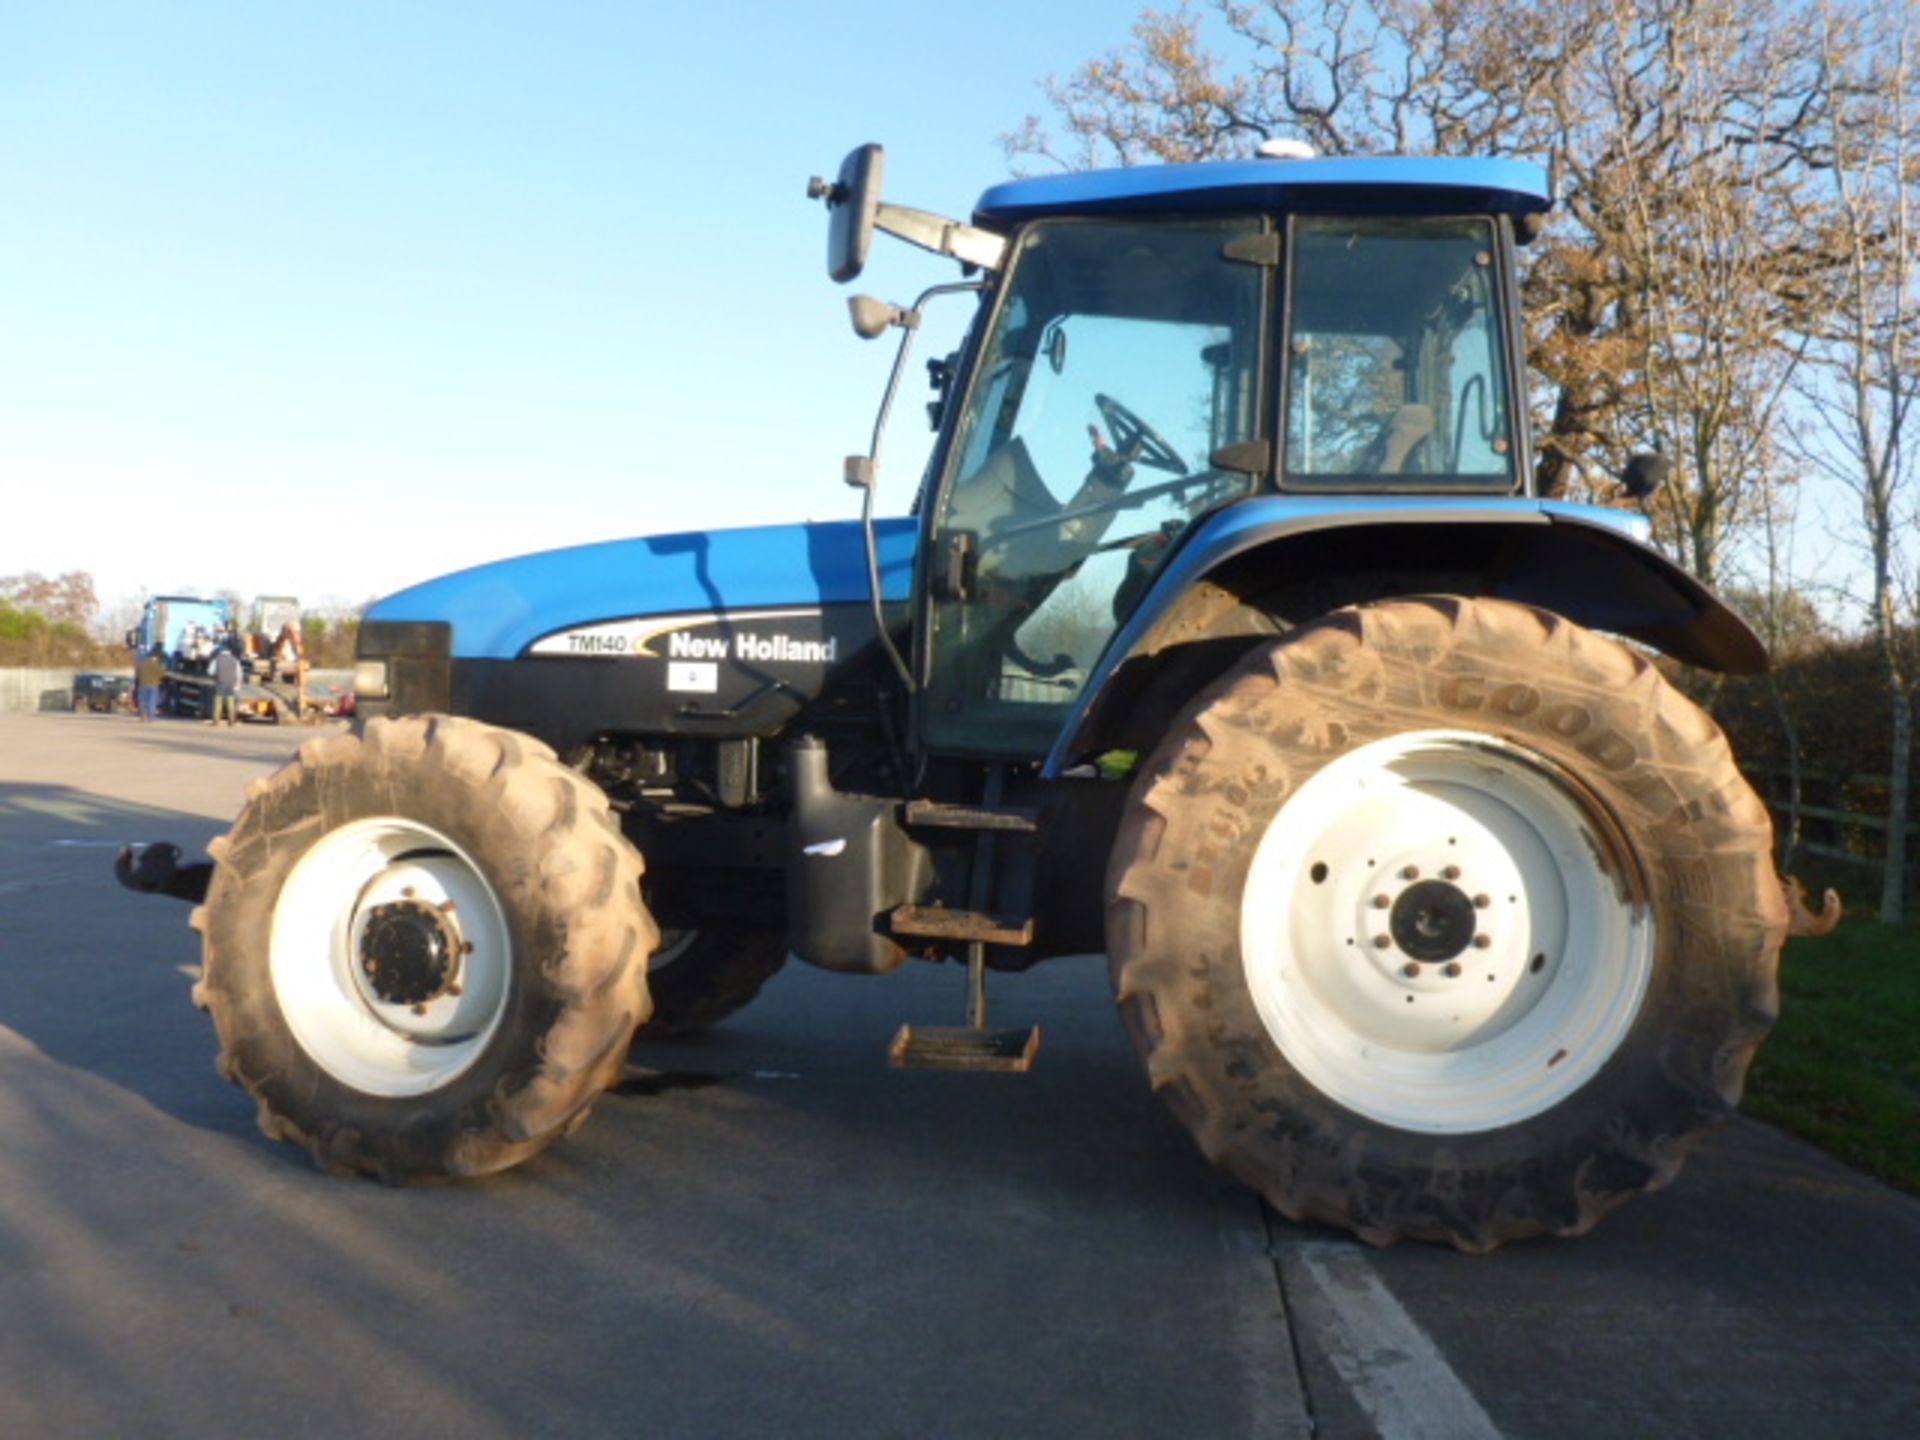 NEW HOLLAND TM 140 (2003) - Image 2 of 3